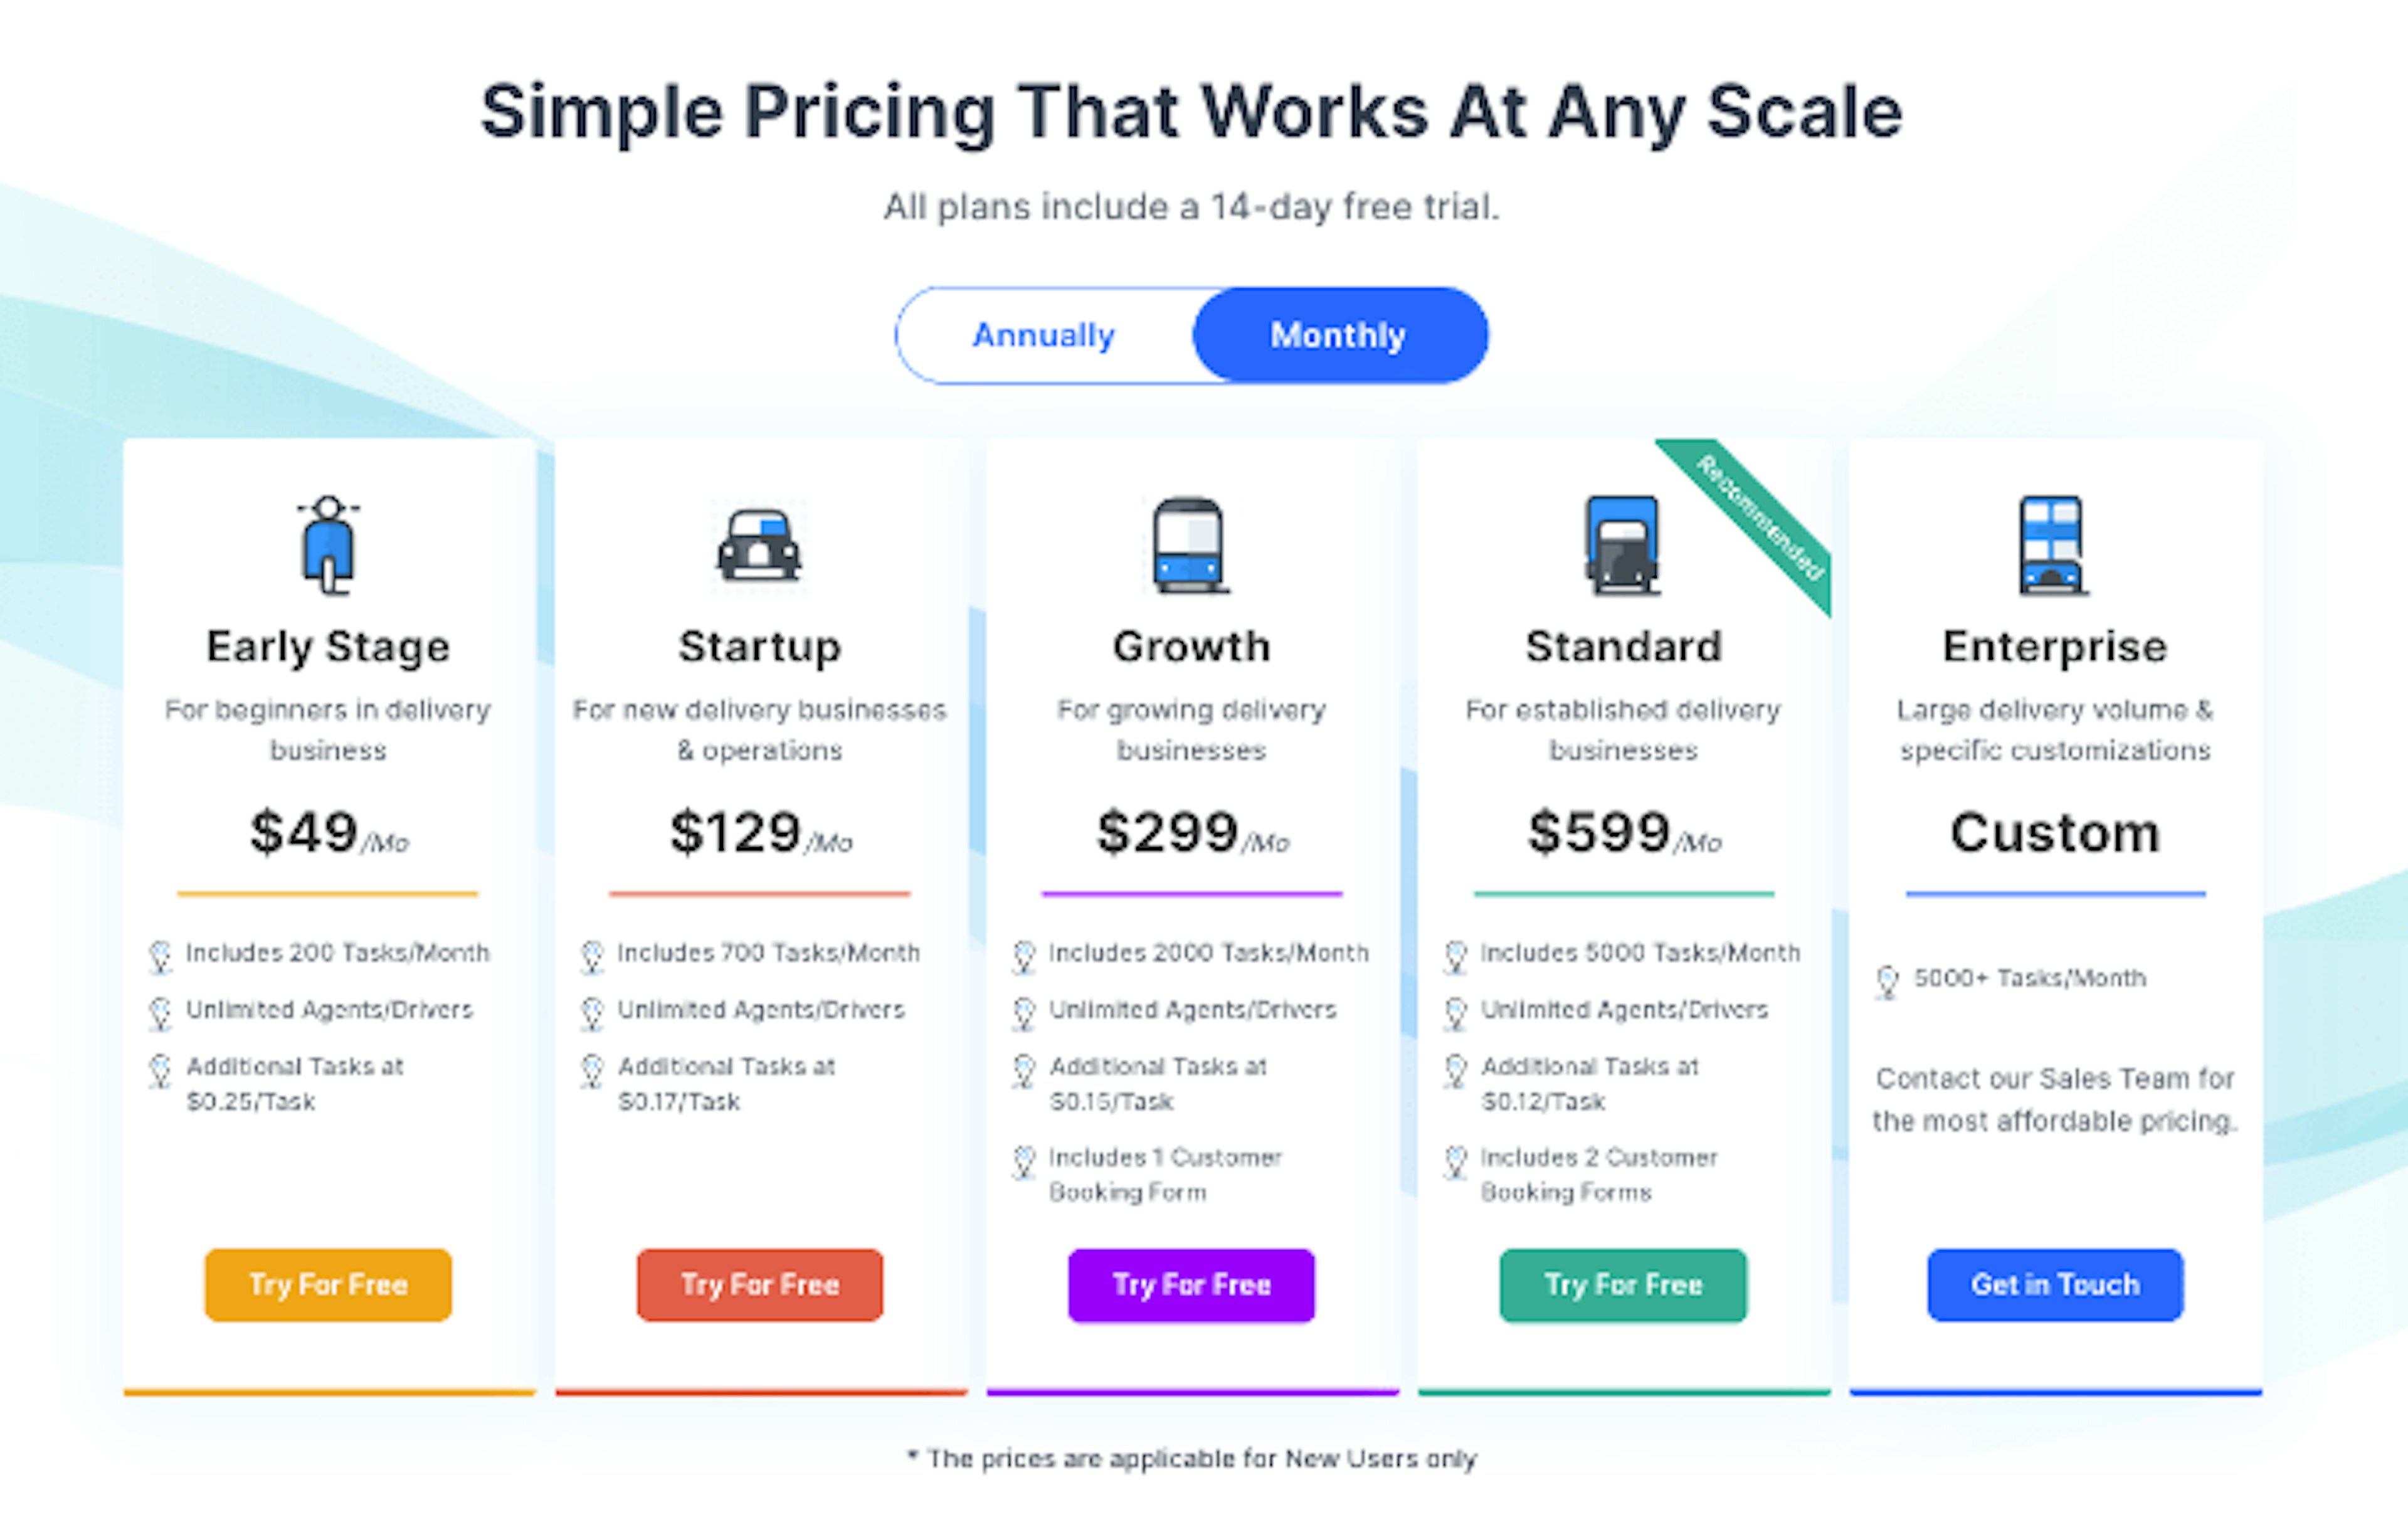 An illustration showing the 5 pricing plans for Tookan